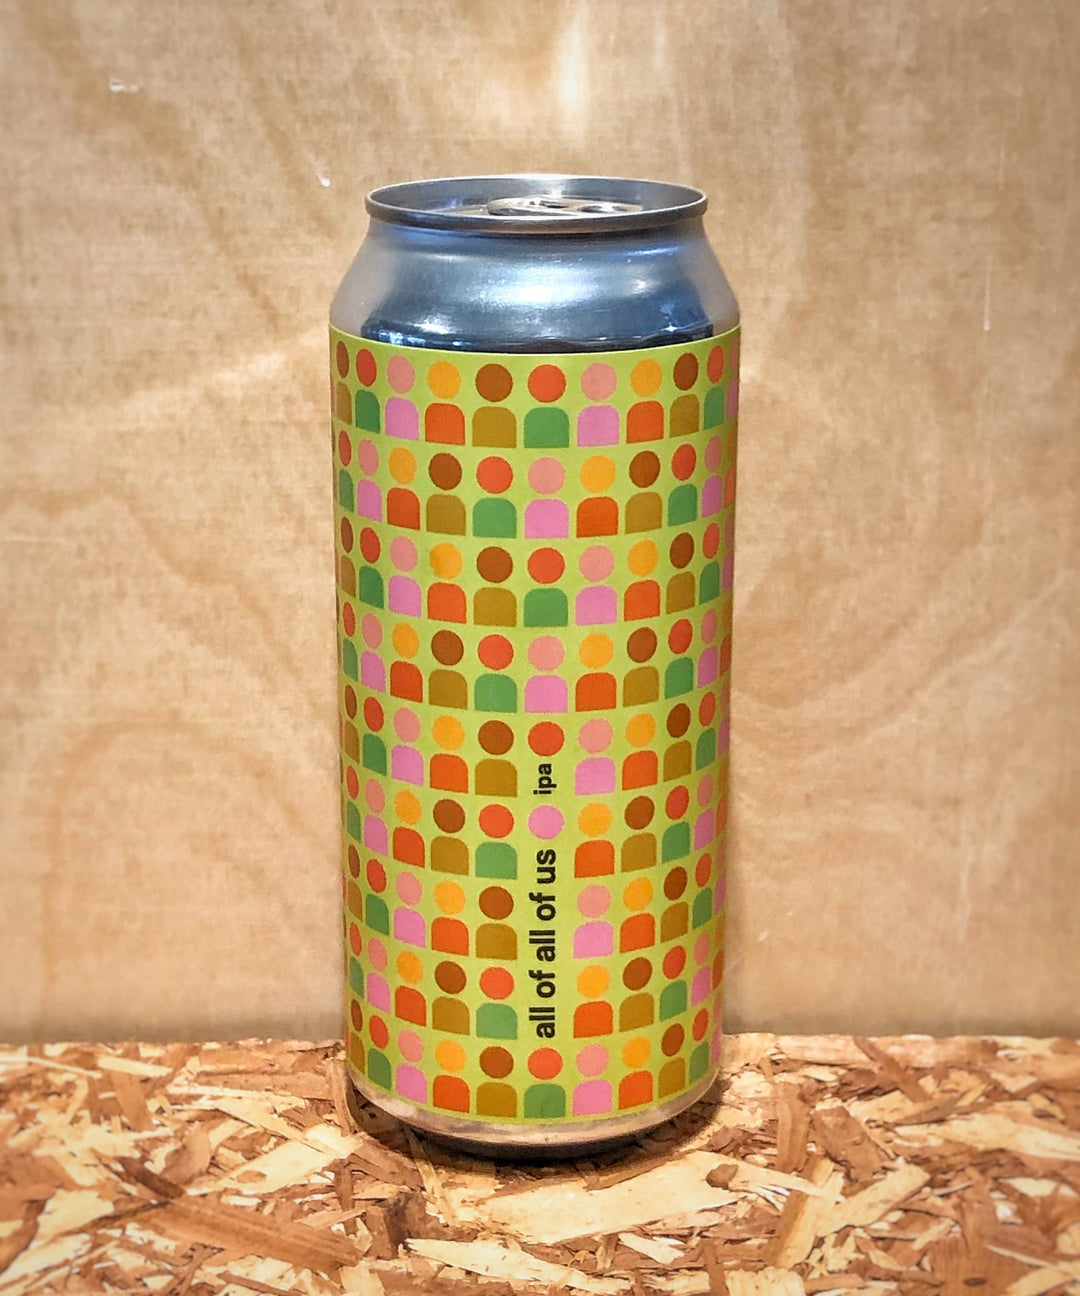 Fair State 'All of All of Us' IPA (Minneapolis, MN)